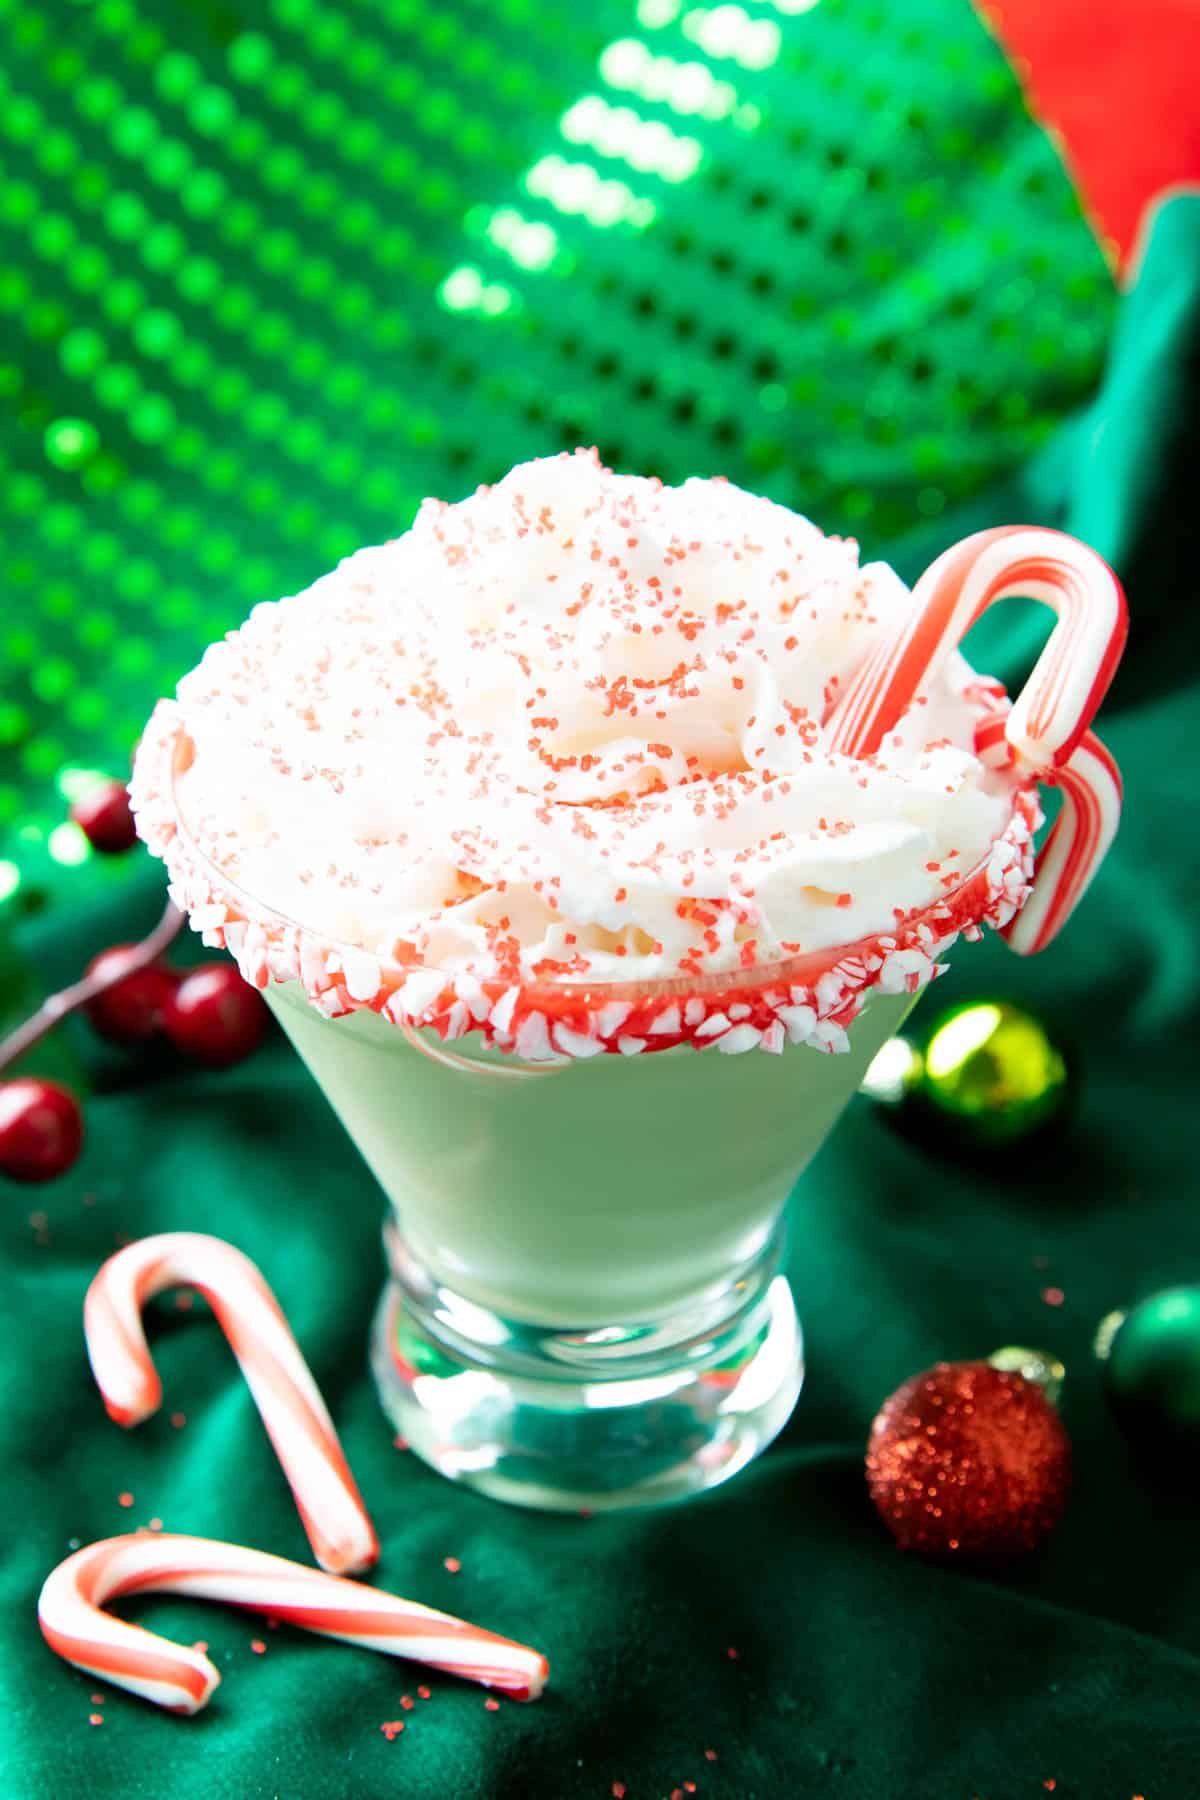 Peppermint Martini topped with whipped cream in a martini glass